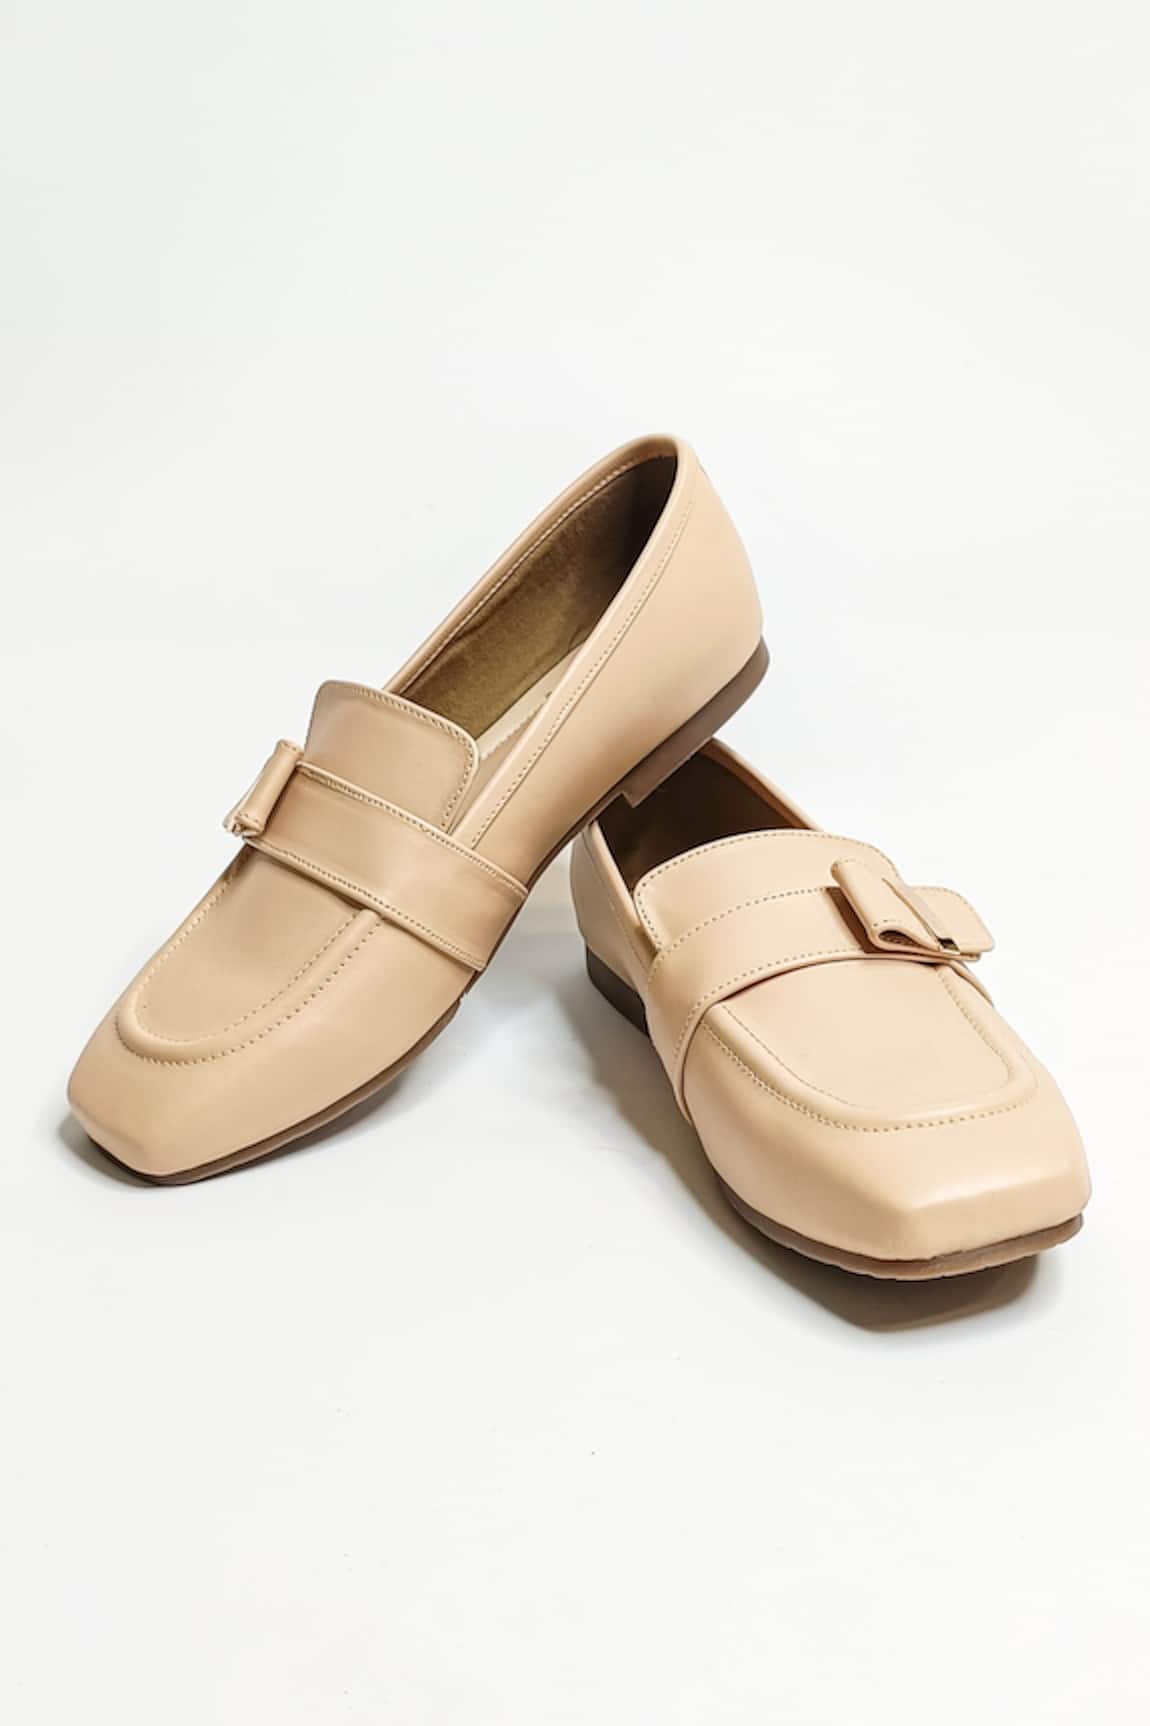 THE ALTER Tessa Buckle Loafers